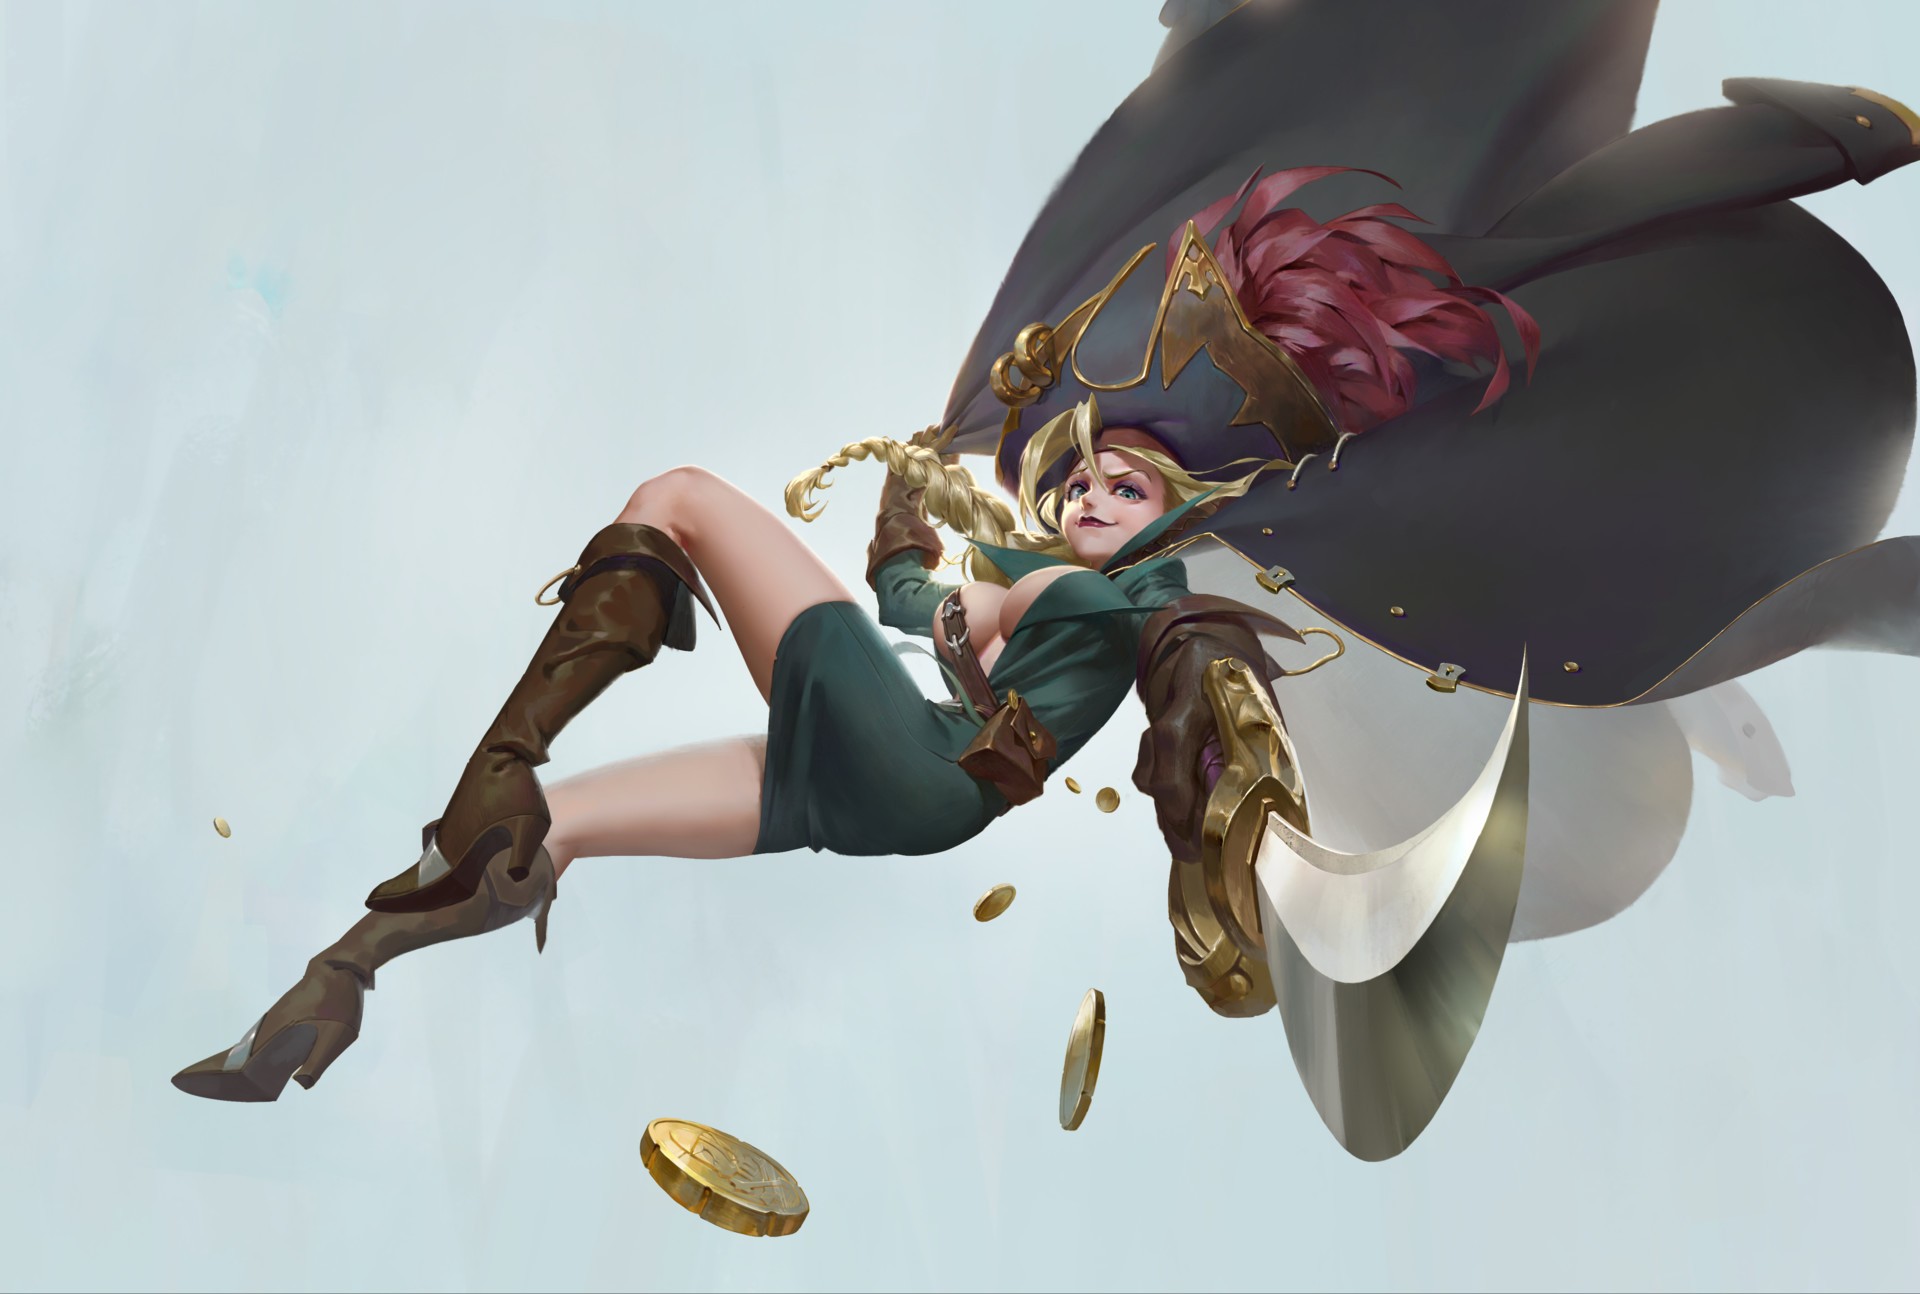 General 1920x1294 pirates sword big boobs legs fantasy girl boots fantasy art digital art simple background coins closed mouth lipstick looking at viewer shoe sole gloves women with swords weapon